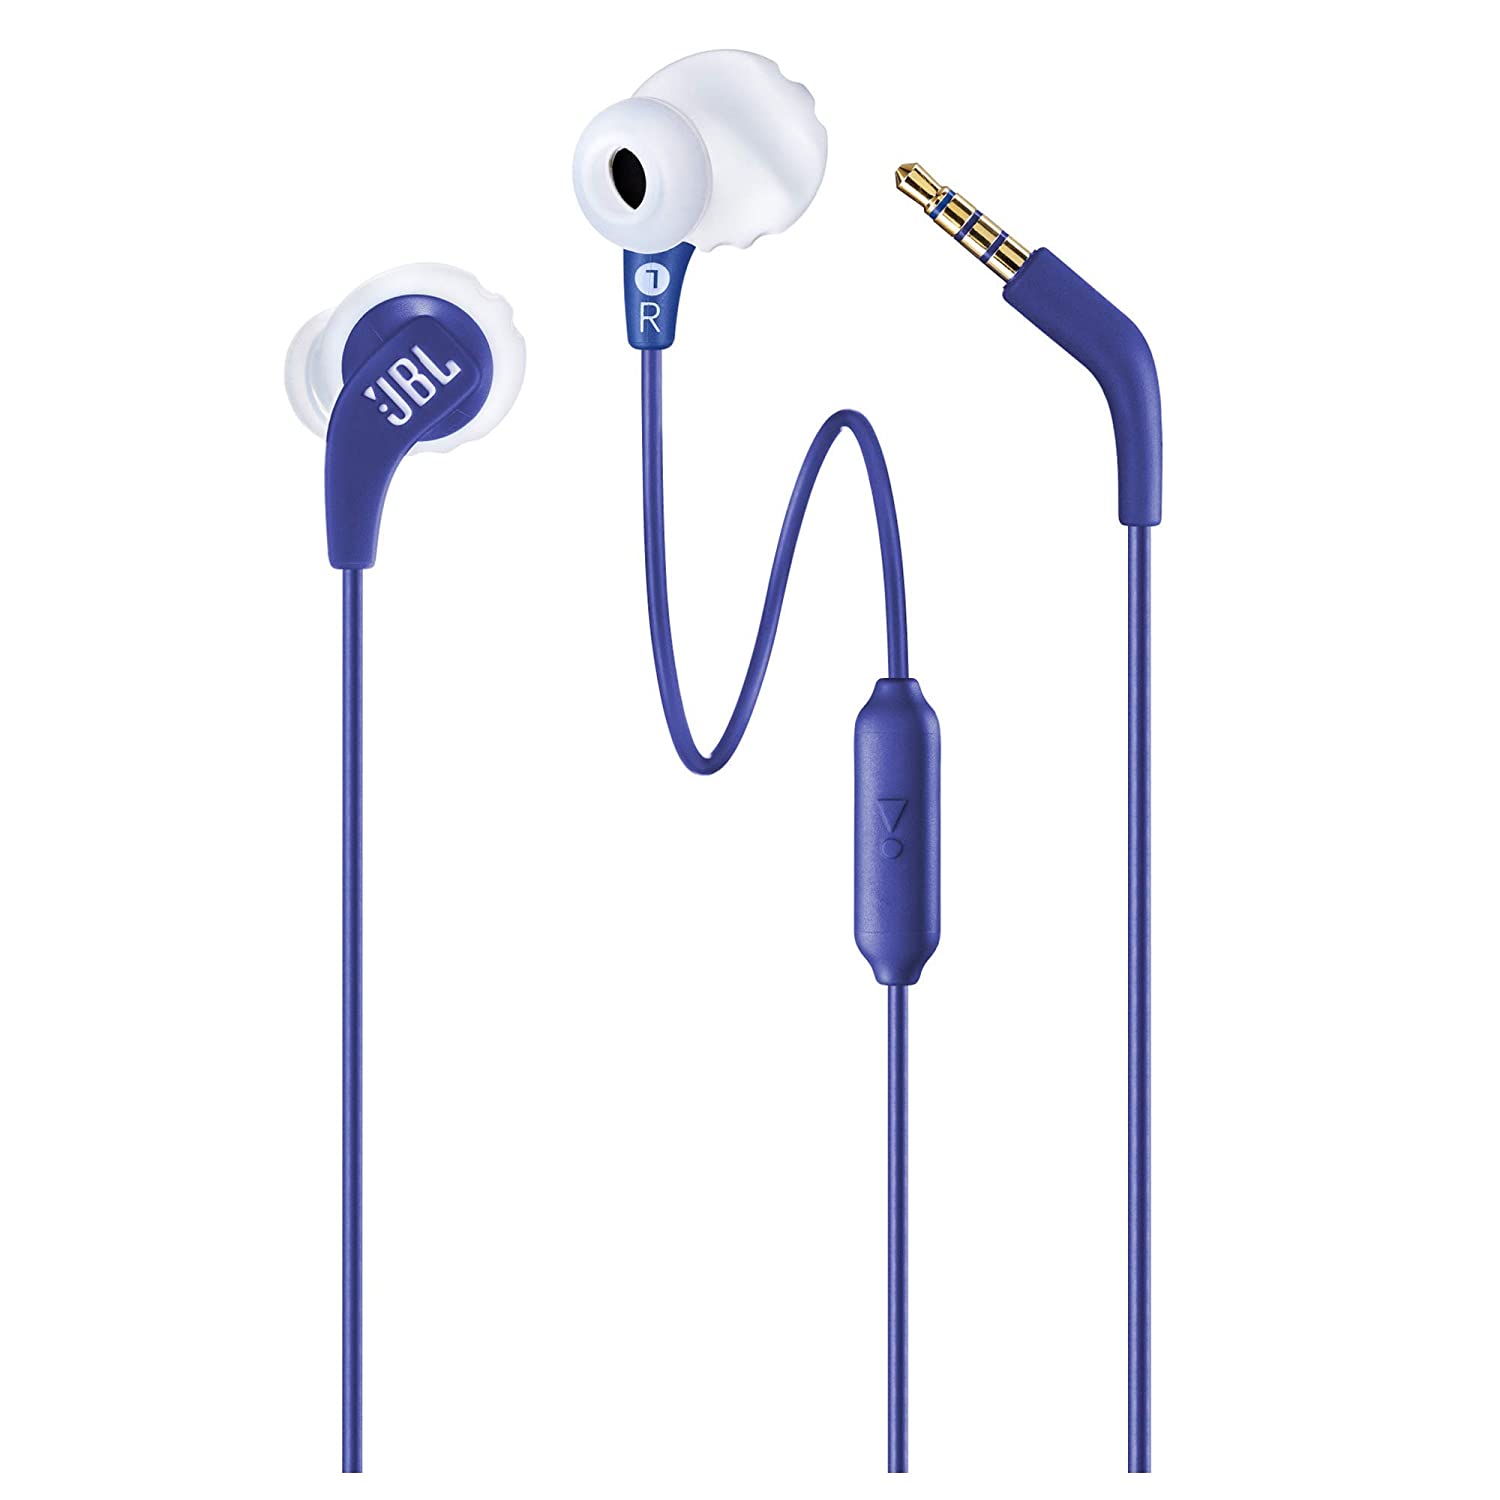 JBL Endurance Run, Sports in Ear Wired Earphones with Mic, Sweatproof, Flexsoft eartips, Magnetic Earbuds, Fliphook & TwistLock Technology with Voice Assistant Support for Mobiles (Blue)